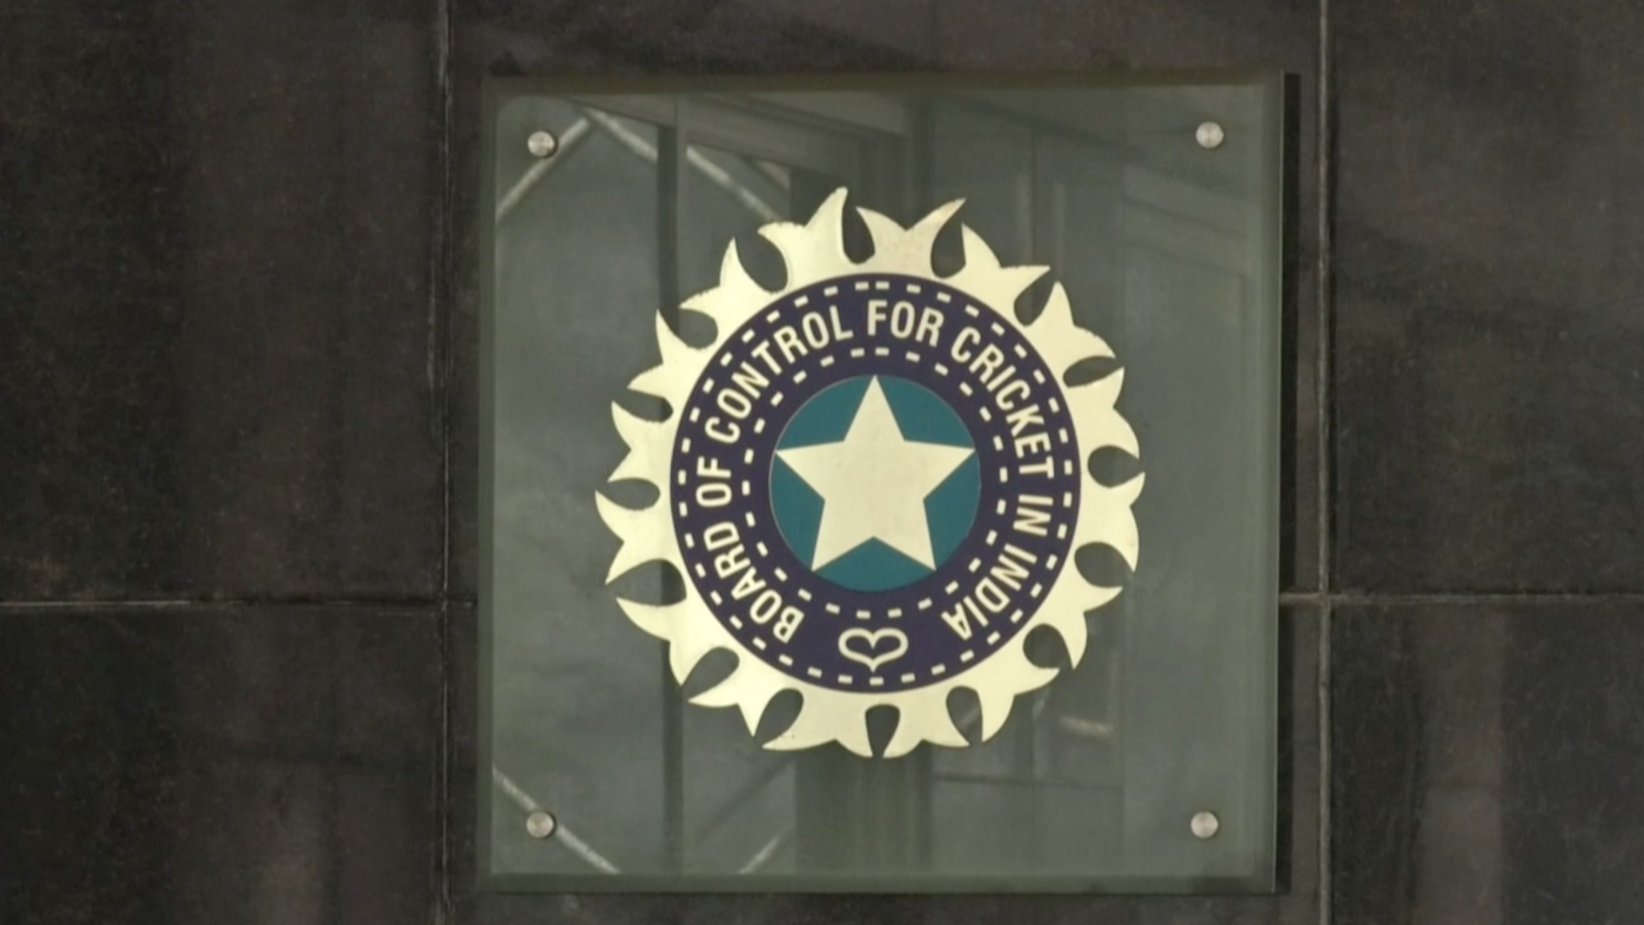 BCCI chalks out IPL expansion plans; fixes player retention to four, increases salary purse: Report